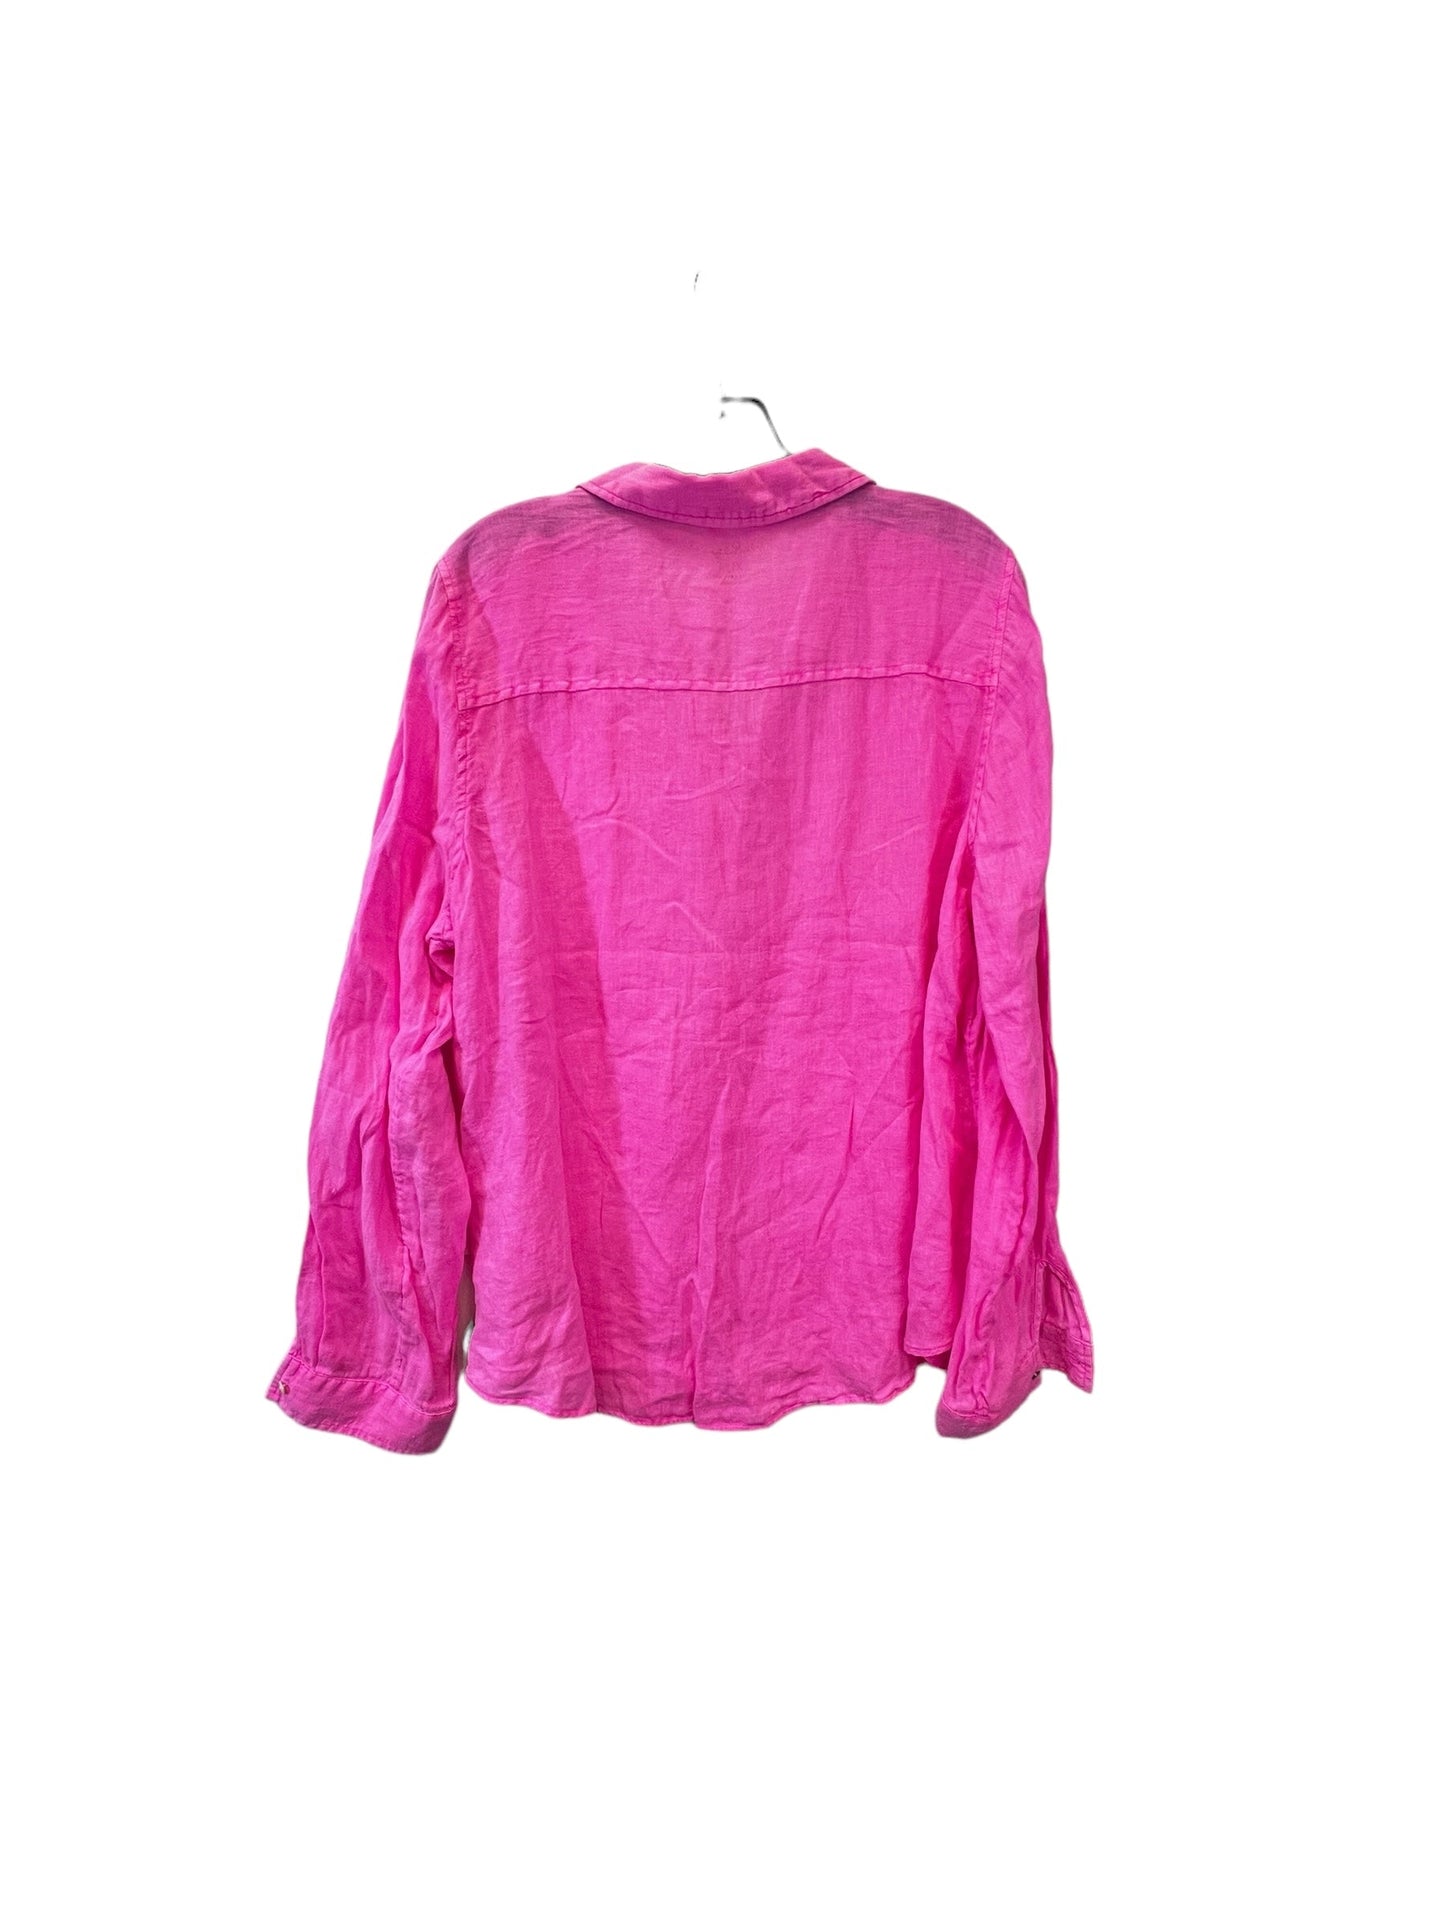 Pink Top Long Sleeve Lilly Pulitzer, Size Xl